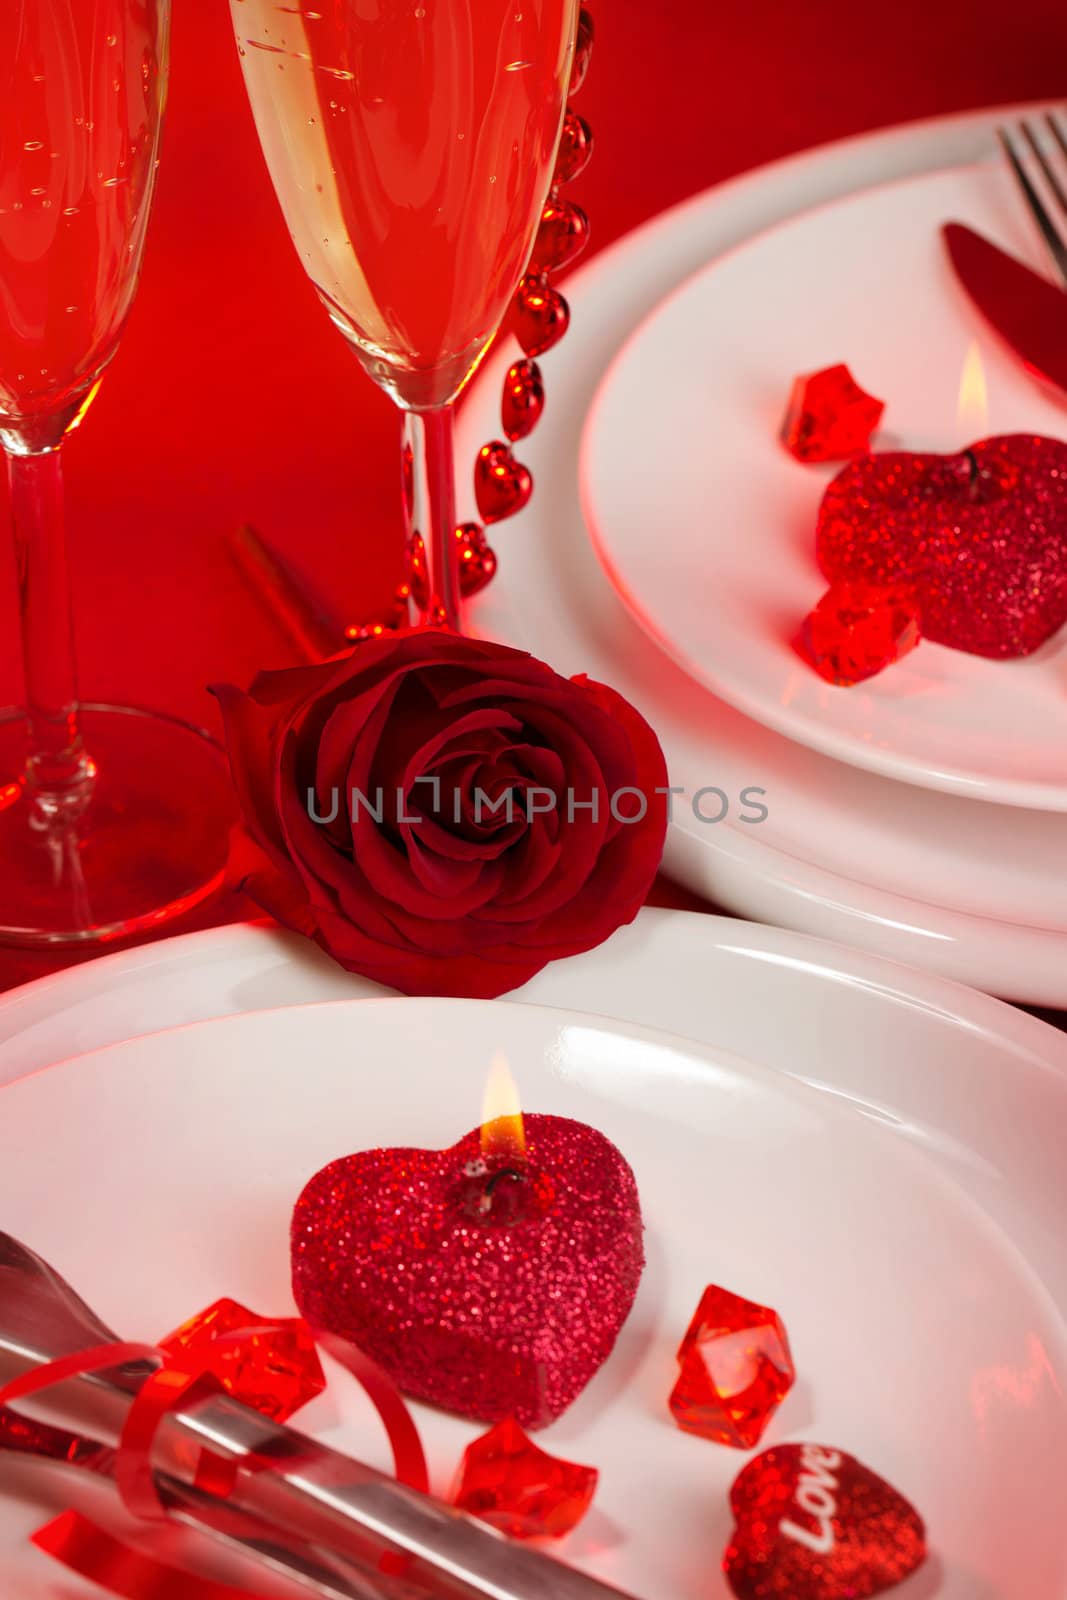 Romantic table setting by Anna_Omelchenko